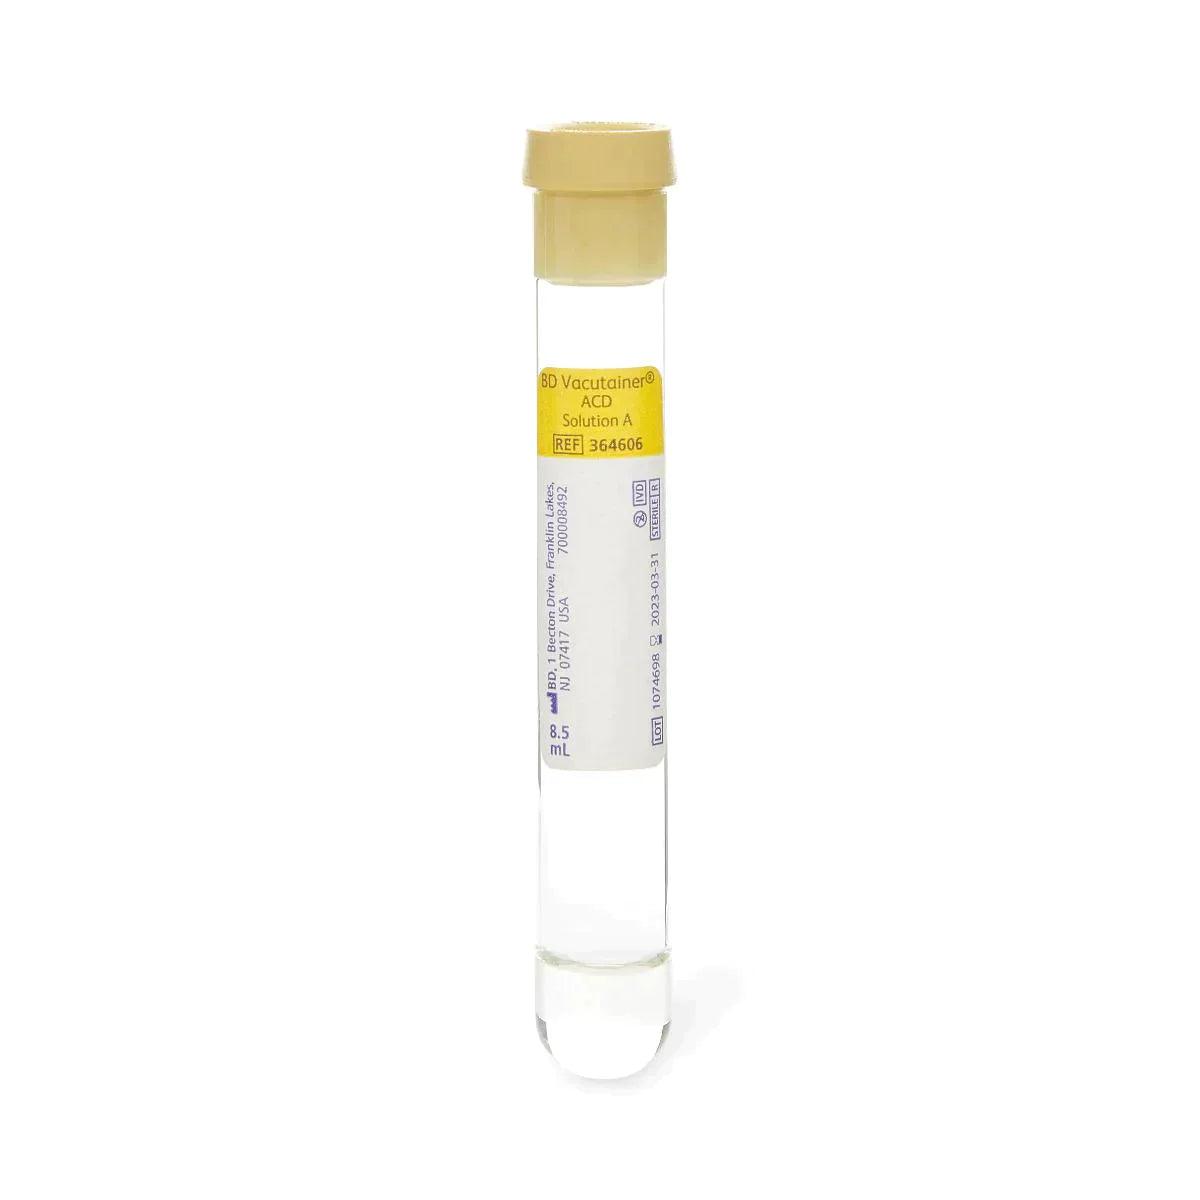 BD 364606 Blood Collector Vacutainer Tubes 16x100mm x 8.5mL